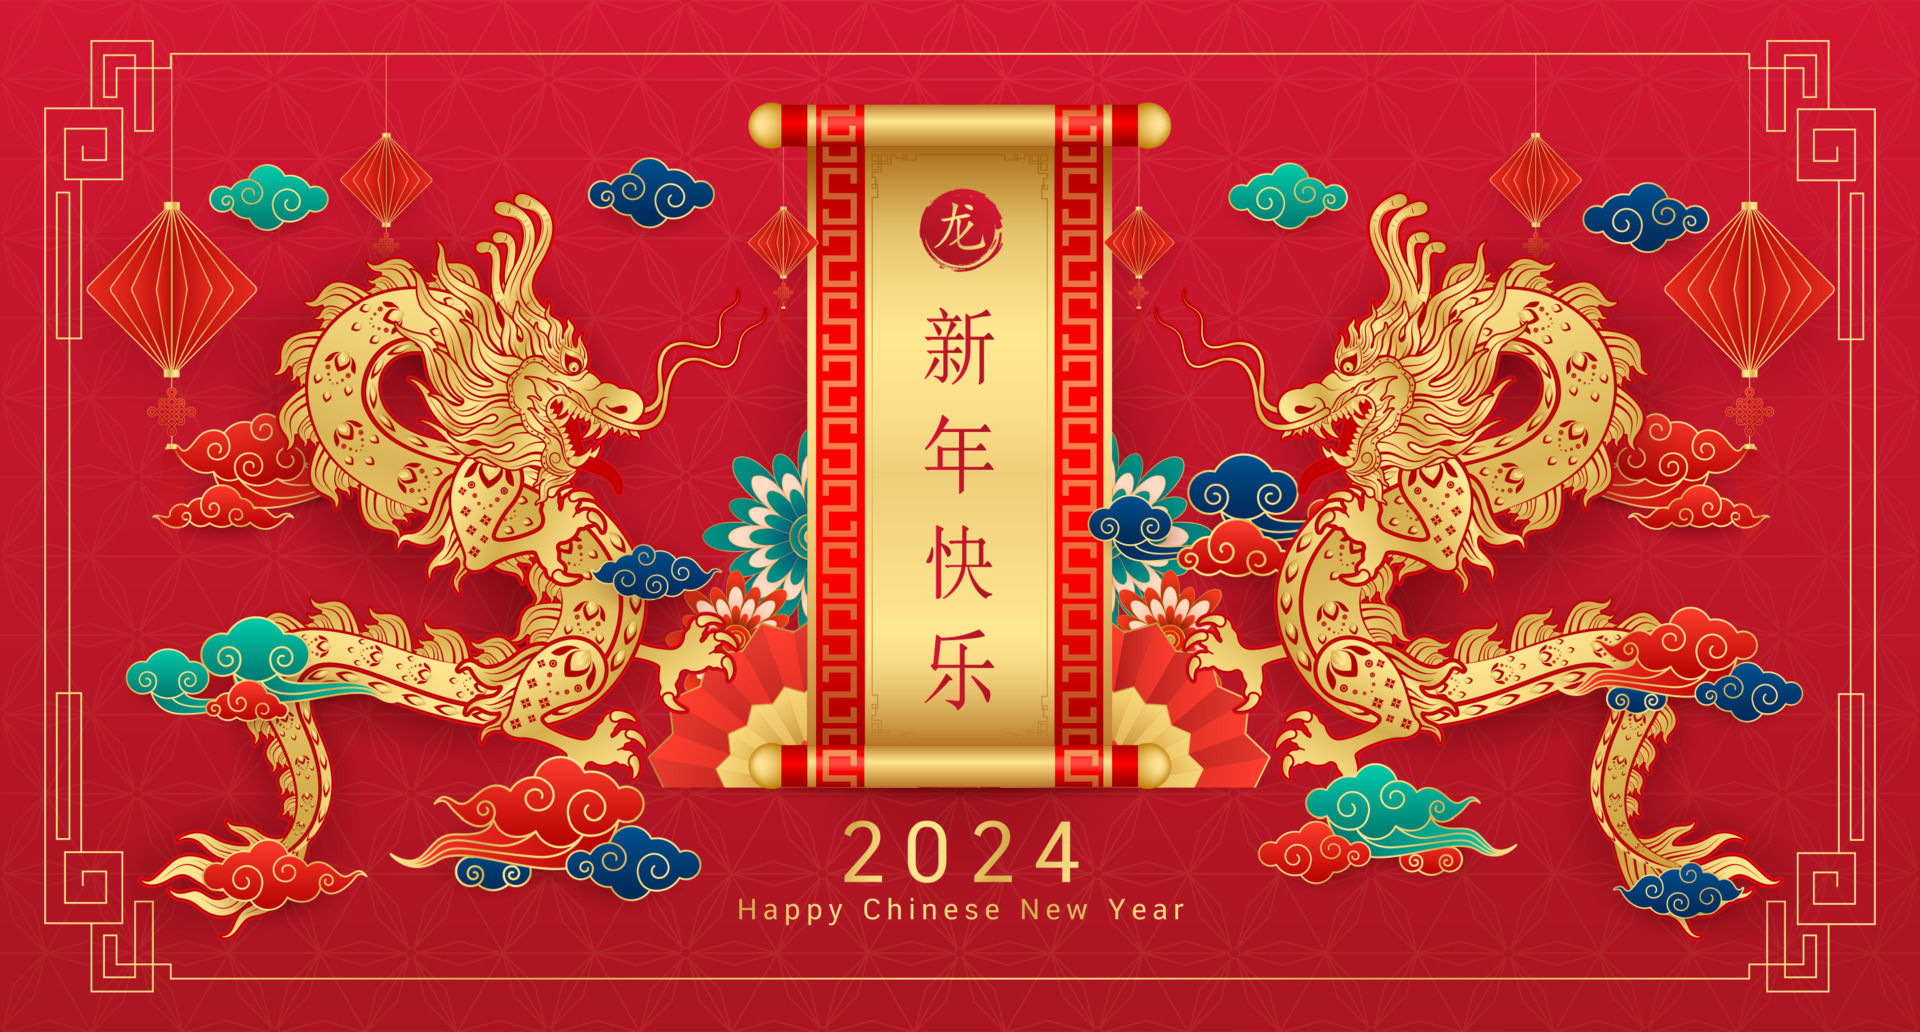 Happy Chinese new year 2024. Dragon gold zodiac sign card flower